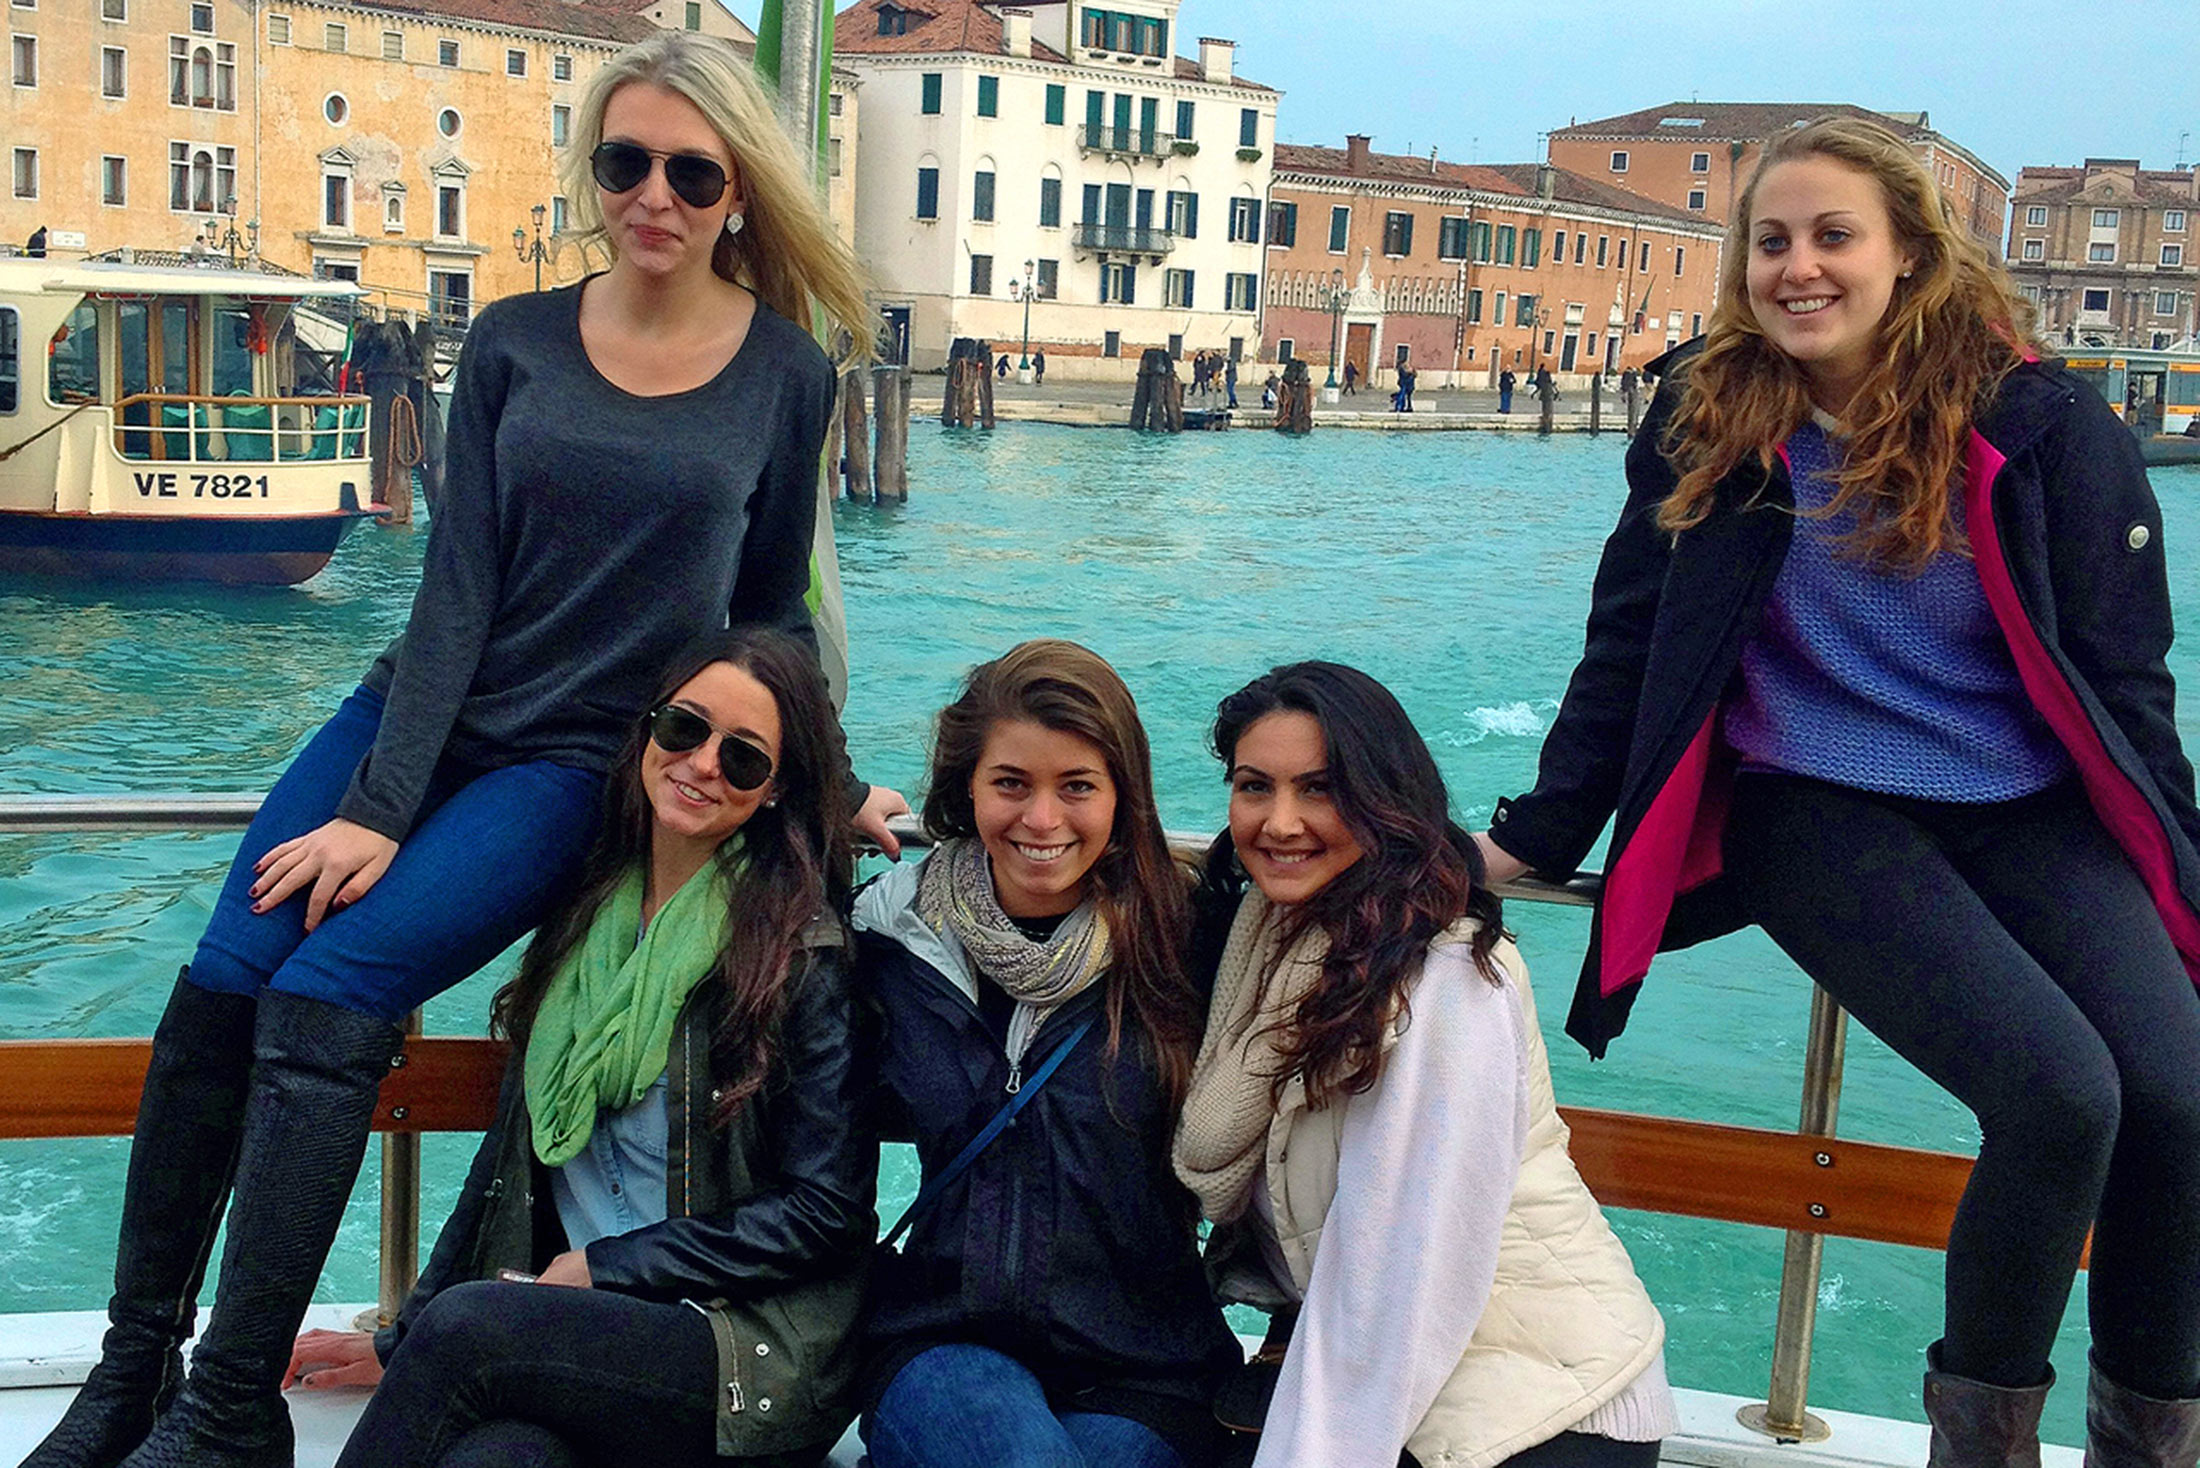 Italian Studies students study abroad in Italy